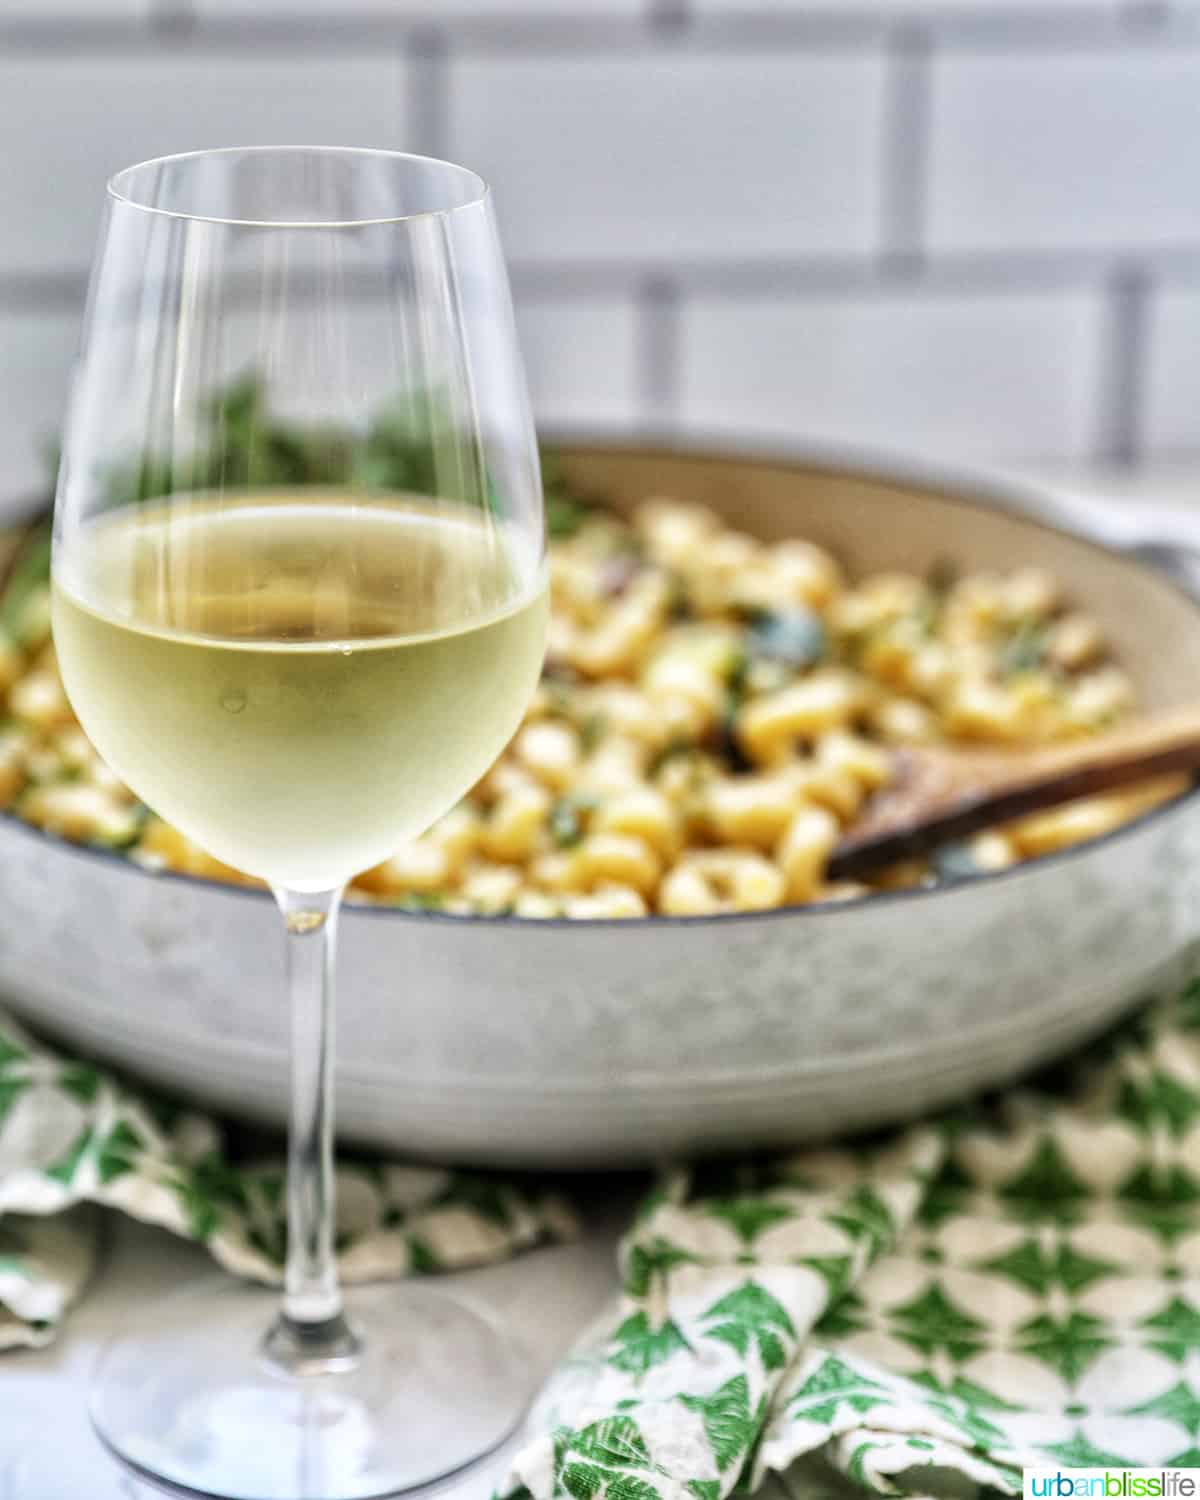 glass of white wine in front of a pan of pasta with a green and white napkin.